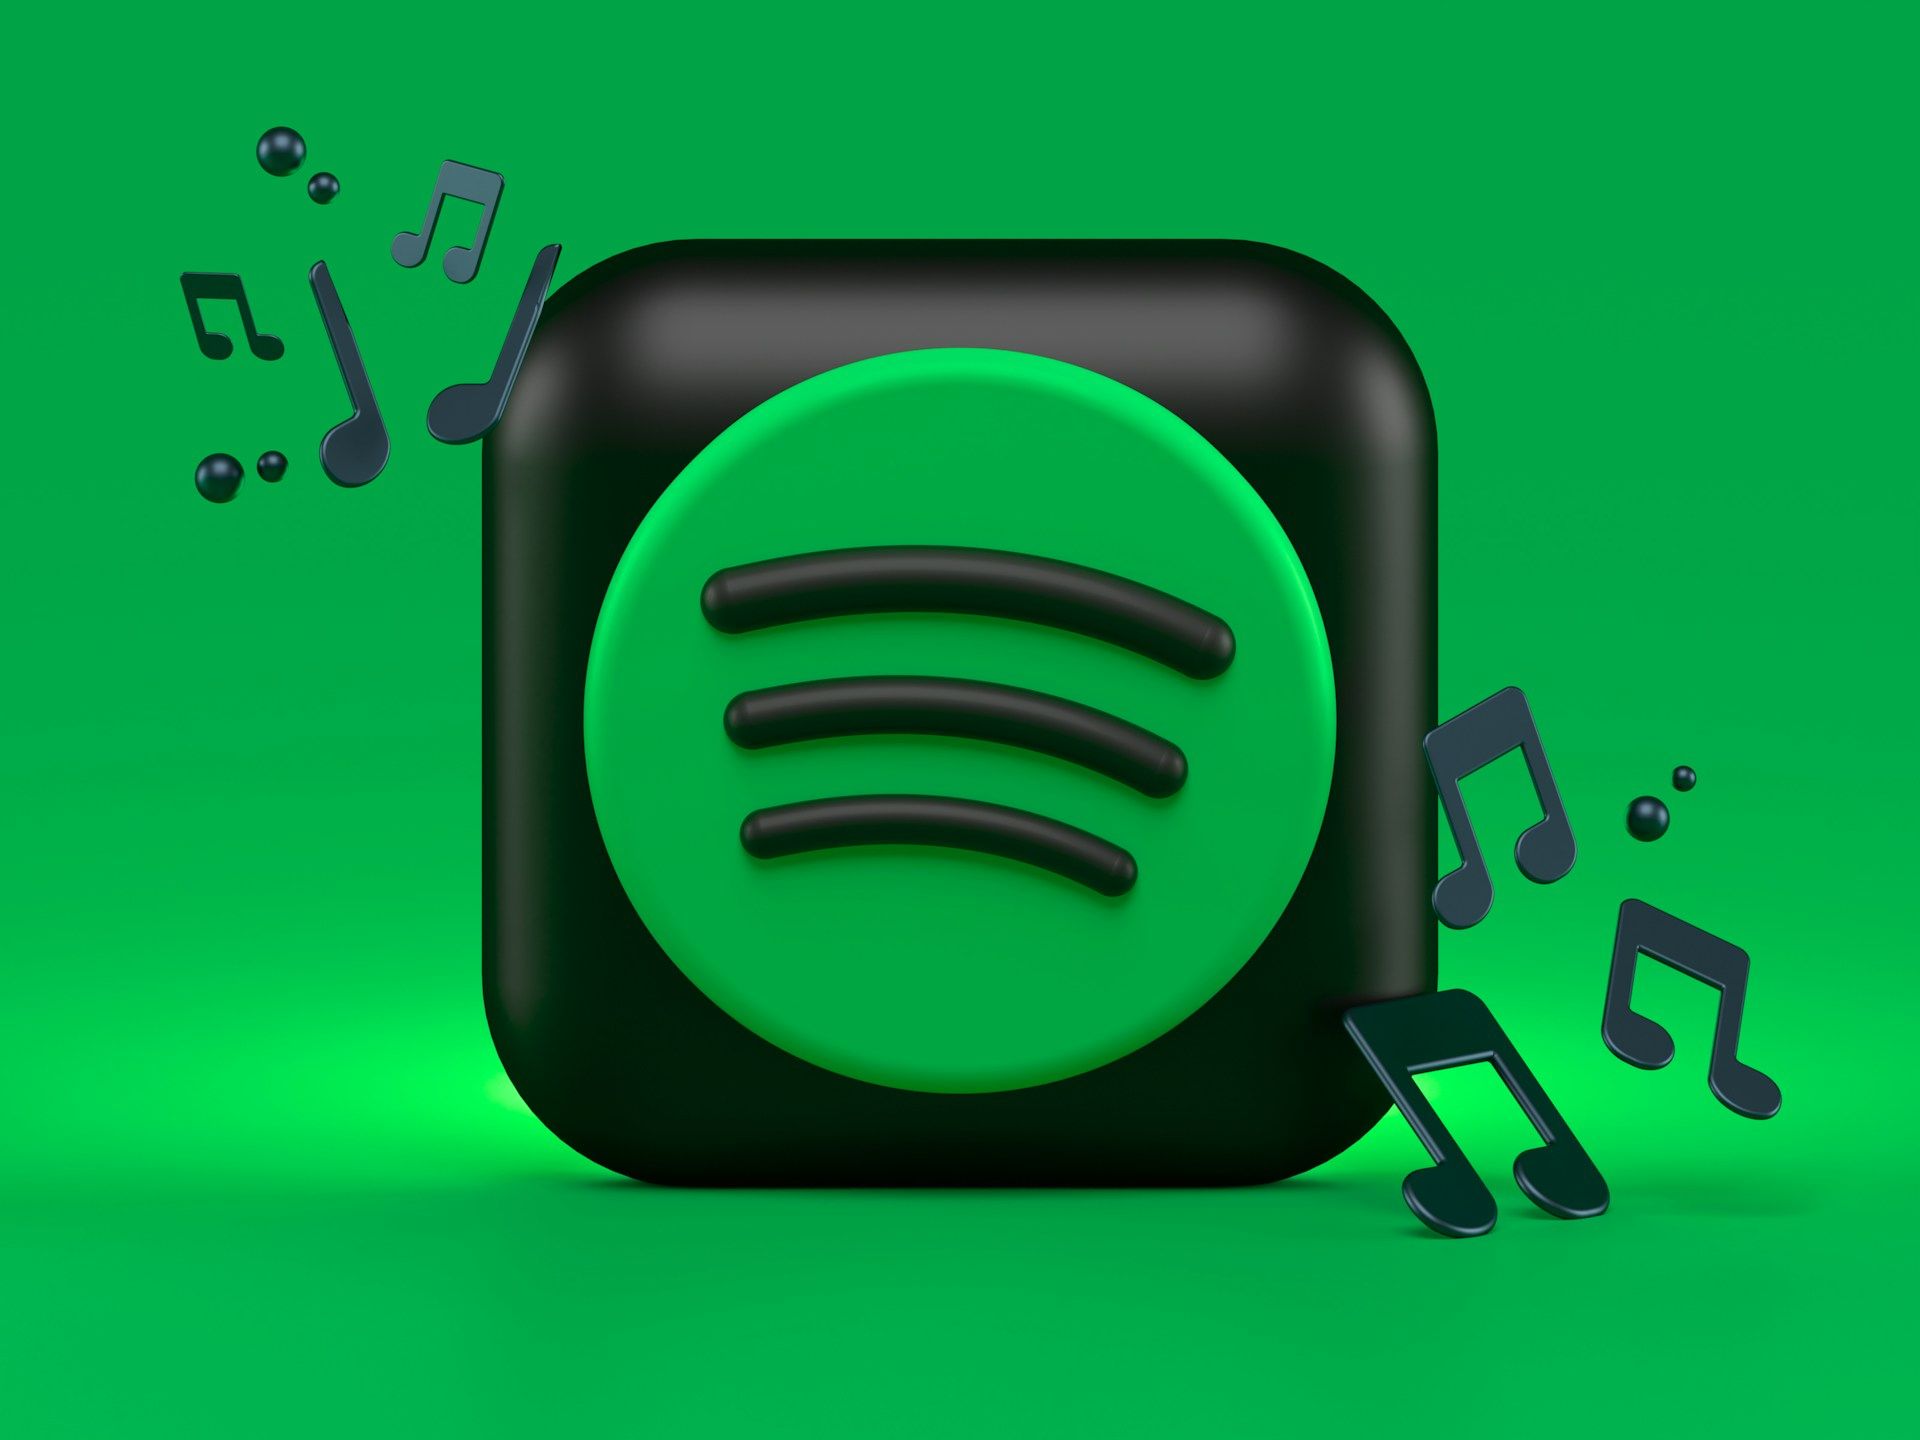 An illustration of the green Spotify logo with music notes surrounding it